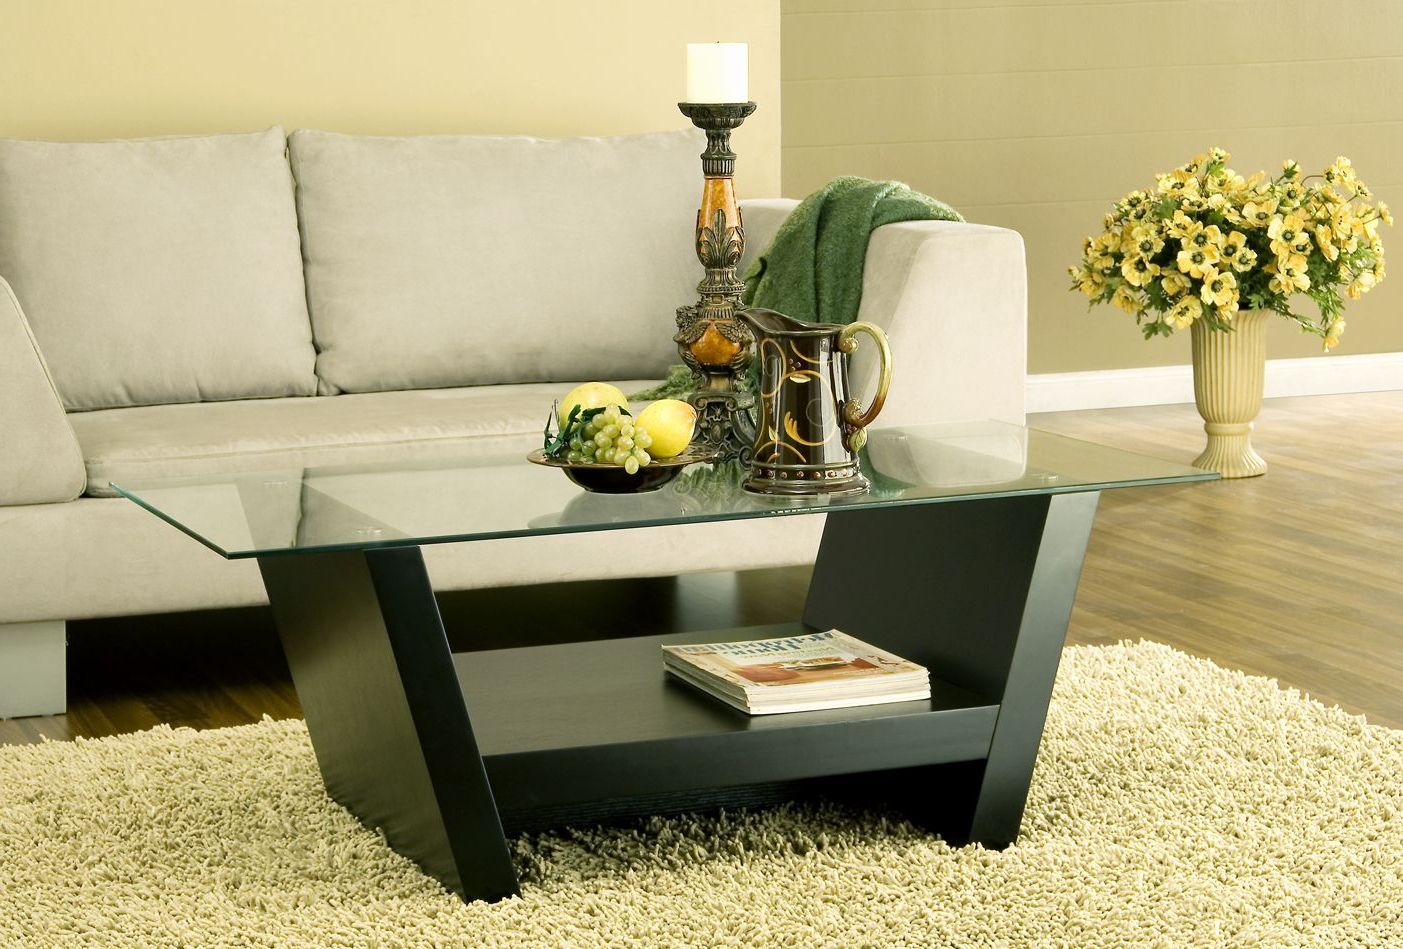 Popular 28220ct Smart Home Glass Top Coffee Table Features A Contemporary Inside Smart Glass Top Coffee Tables (View 12 of 20)